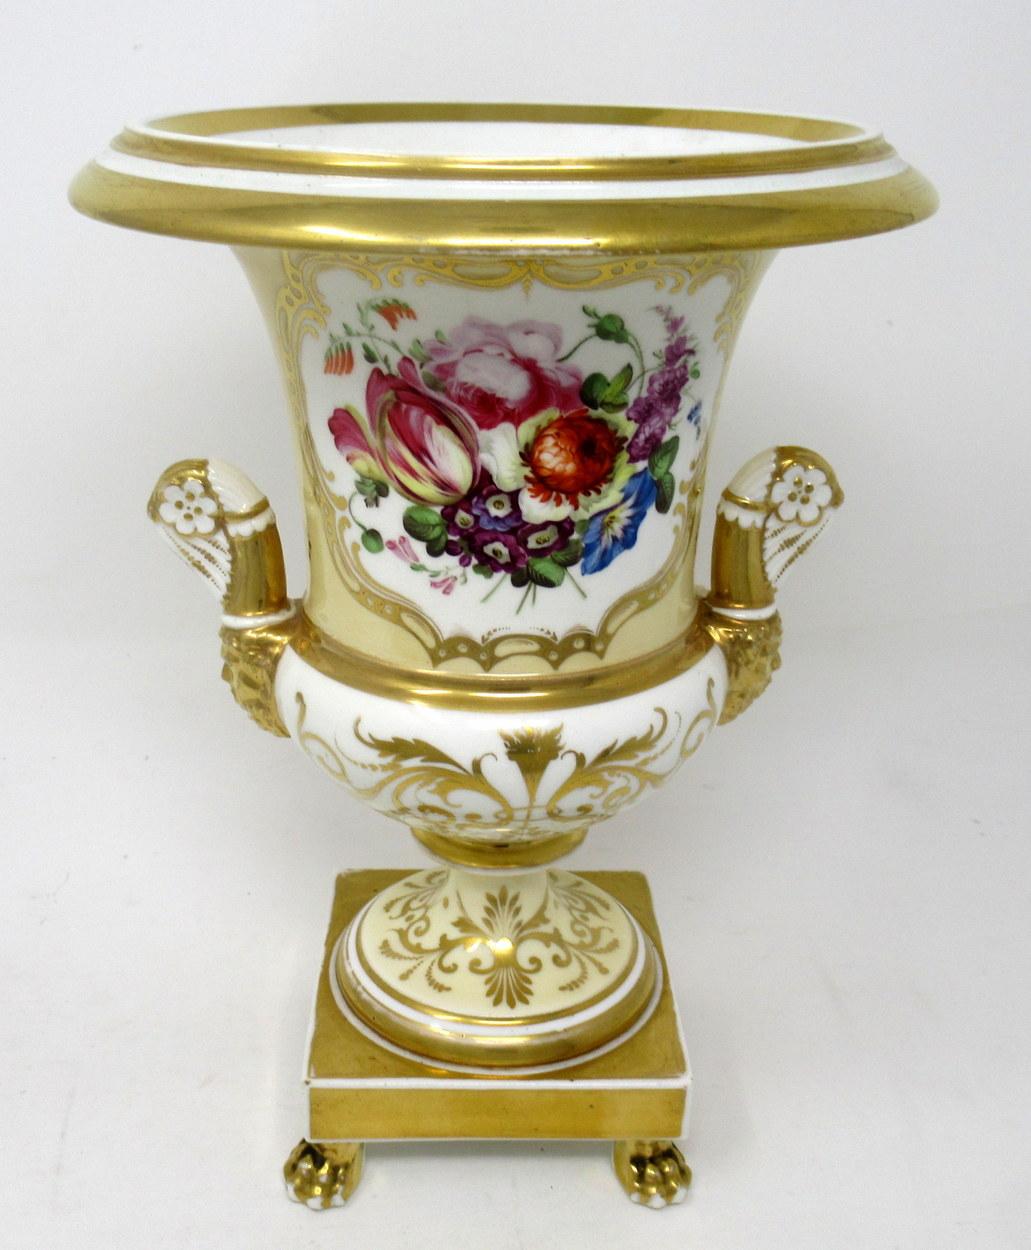 Stunning hand painted heavy gauge and generous size English porcelain Coalport Urn of campana form with hand painted central reserves depicting Old Summer Roses and various flowers, back view with similar decoration on a pale yellow ground, with